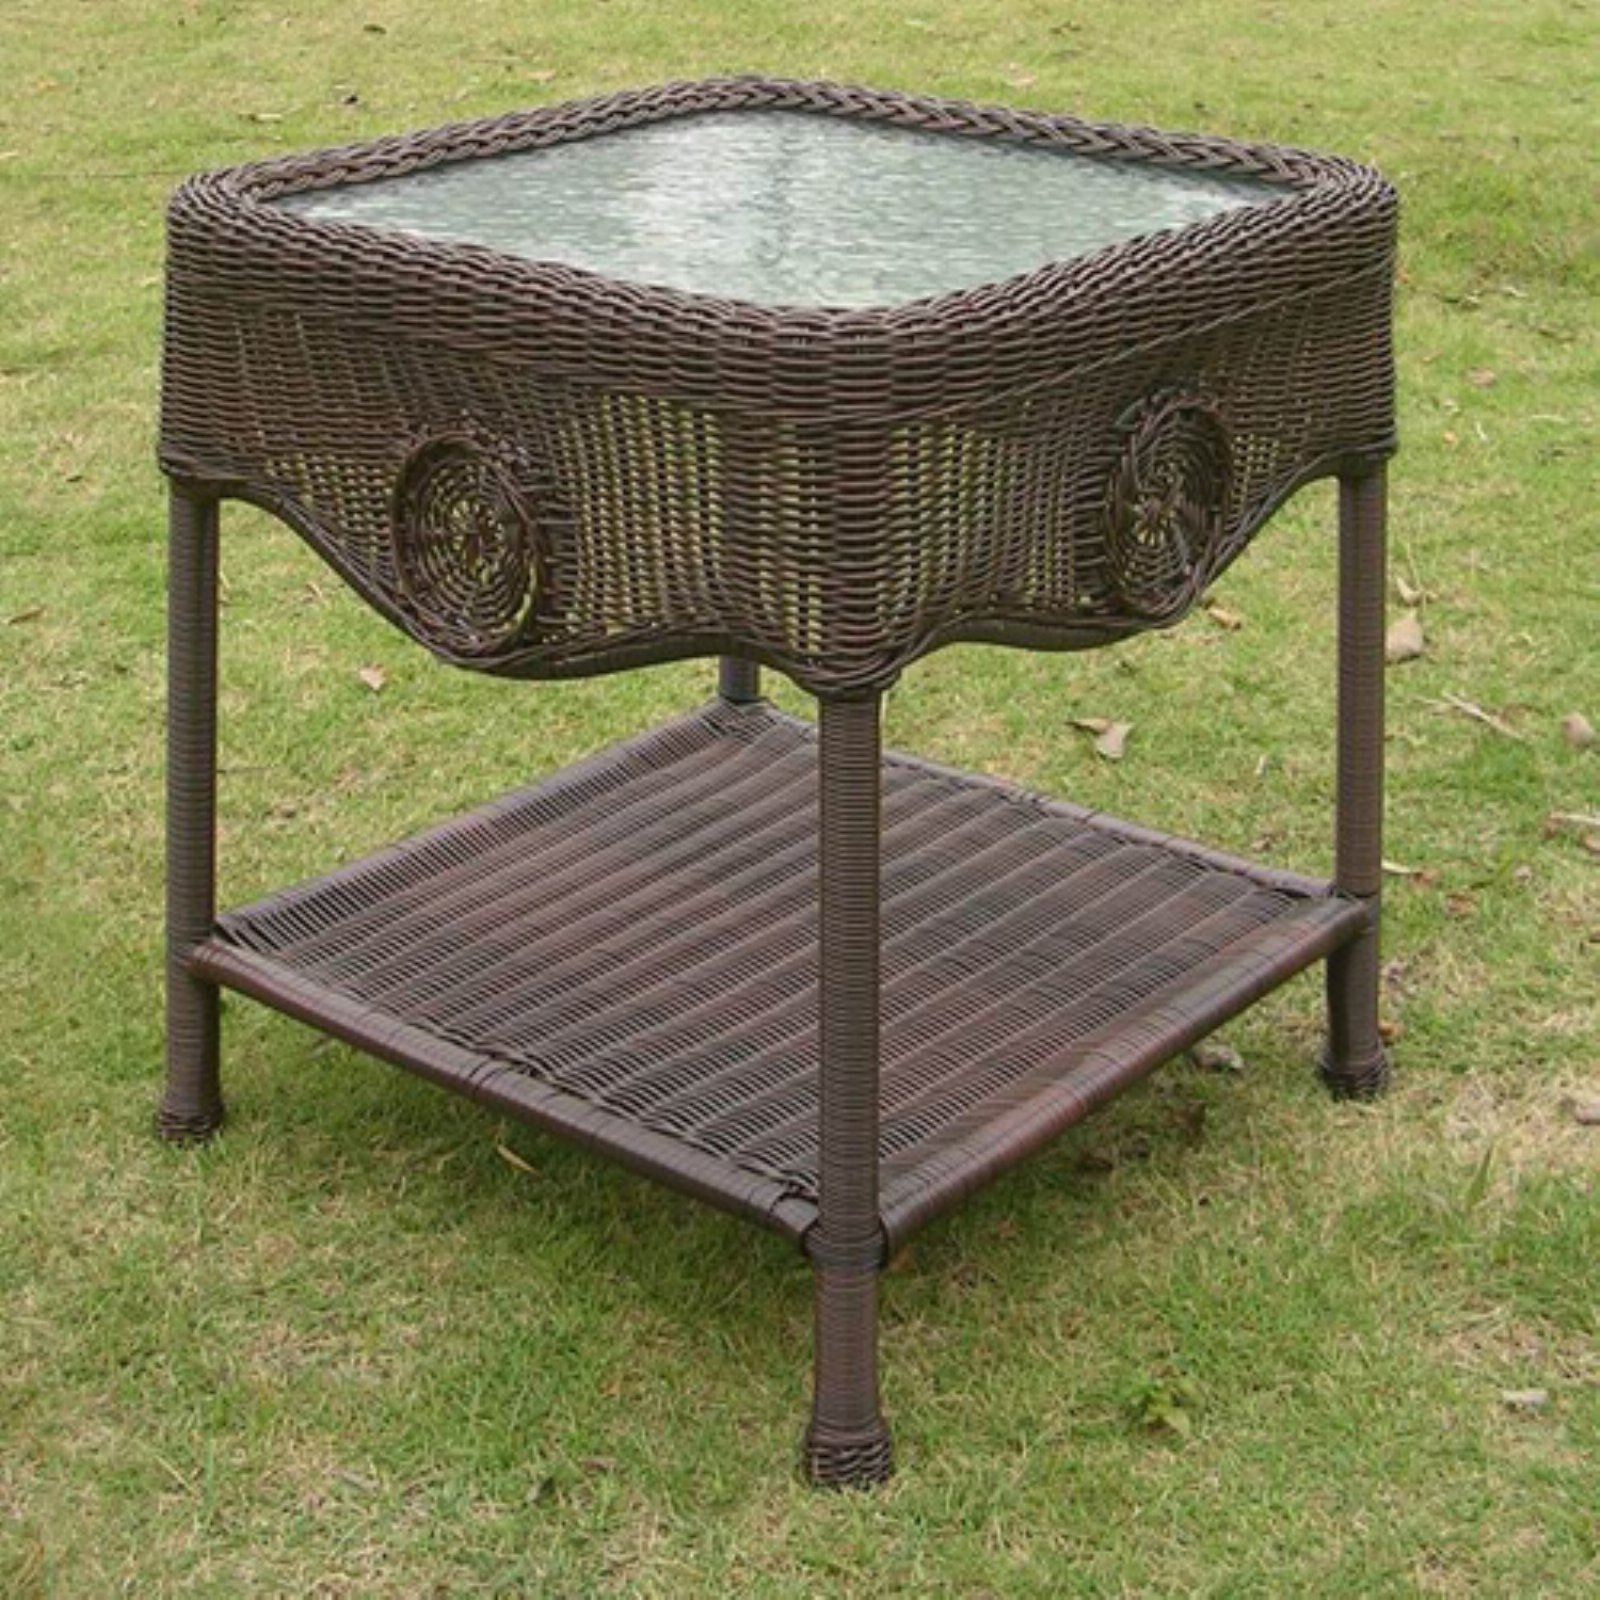 International Caravan Madison Wicker Resin Aluminum Patio Side Table with Glass - image 2 of 7